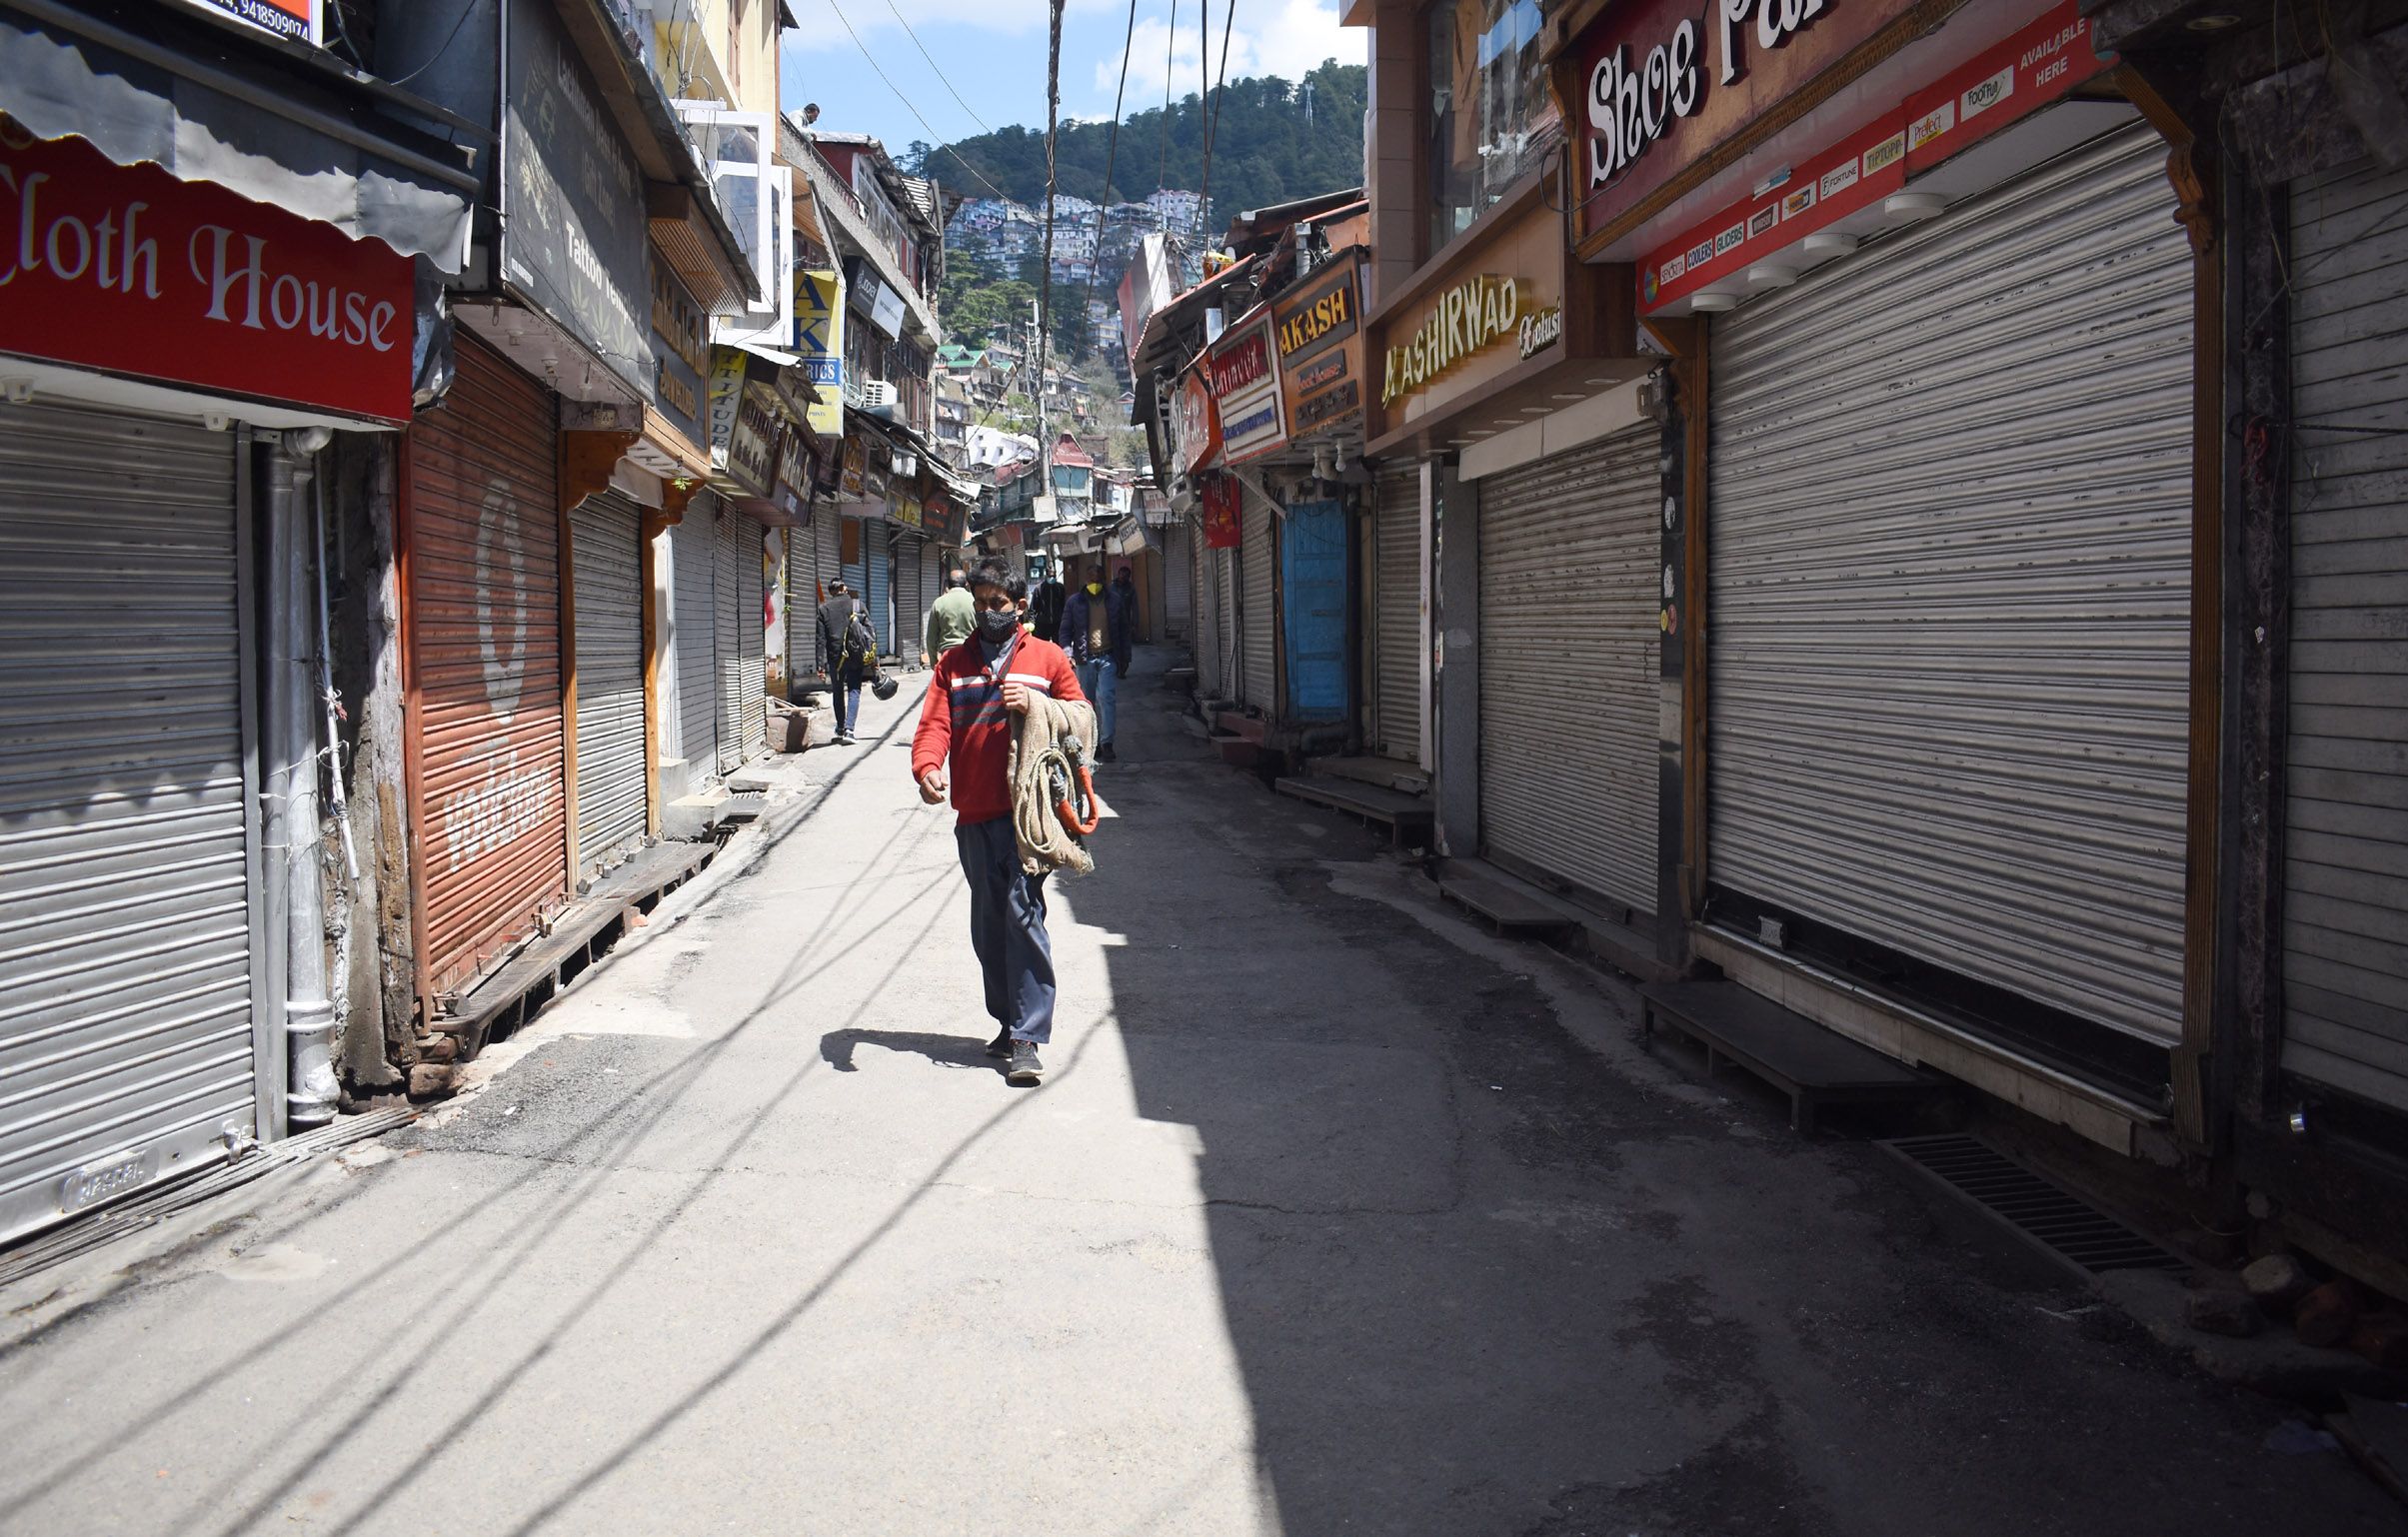 A view of Lower Bazar after the governments decision of weekend lockdown, on April 24, 2021 in Shimla, India